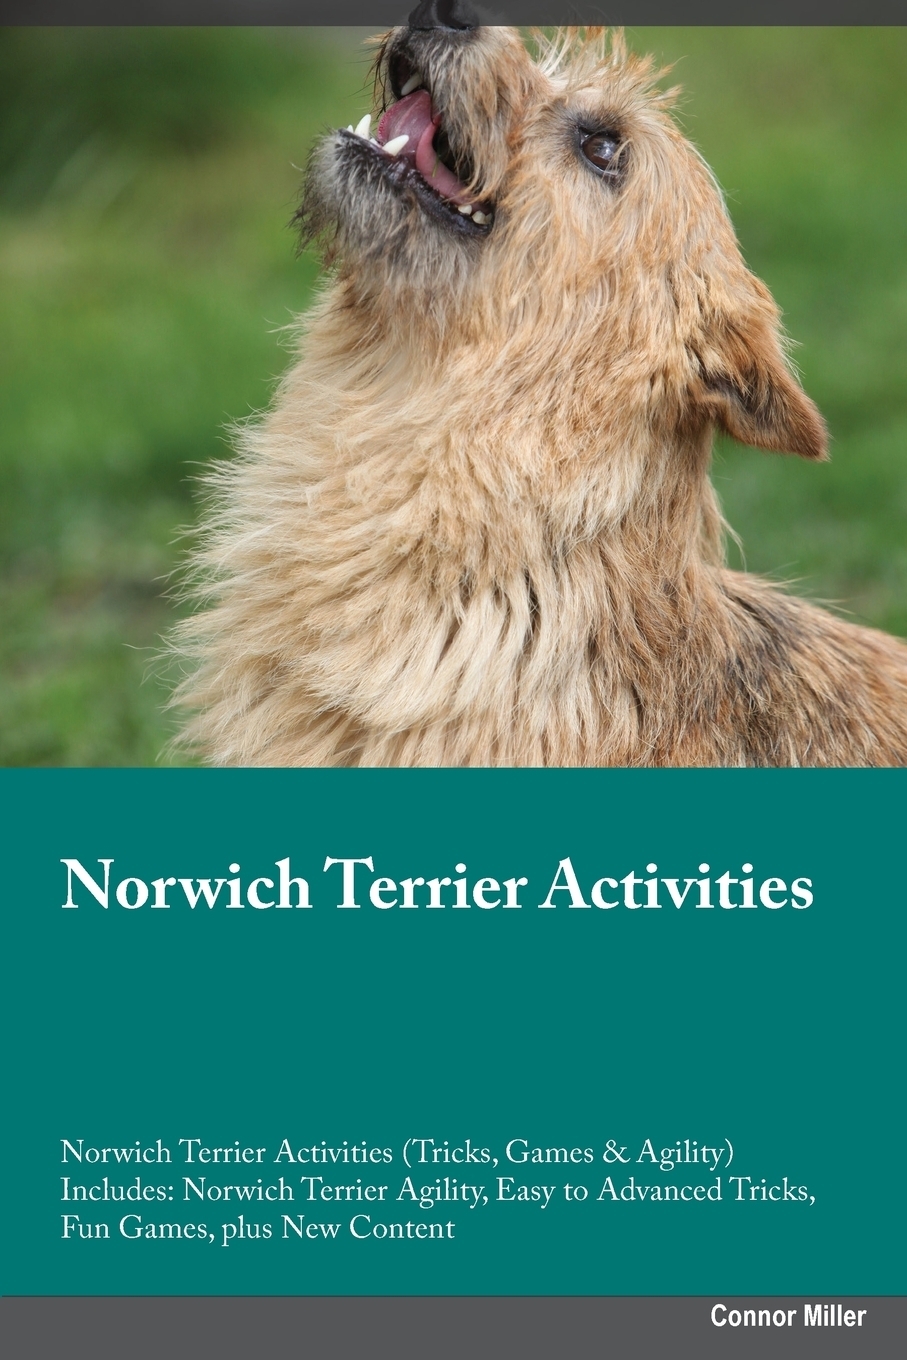 фото Norwich Terrier Activities Norwich Terrier Activities (Tricks, Games & Agility) Includes. Norwich Terrier Agility, Easy to Advanced Tricks, Fun Games, plus New Content